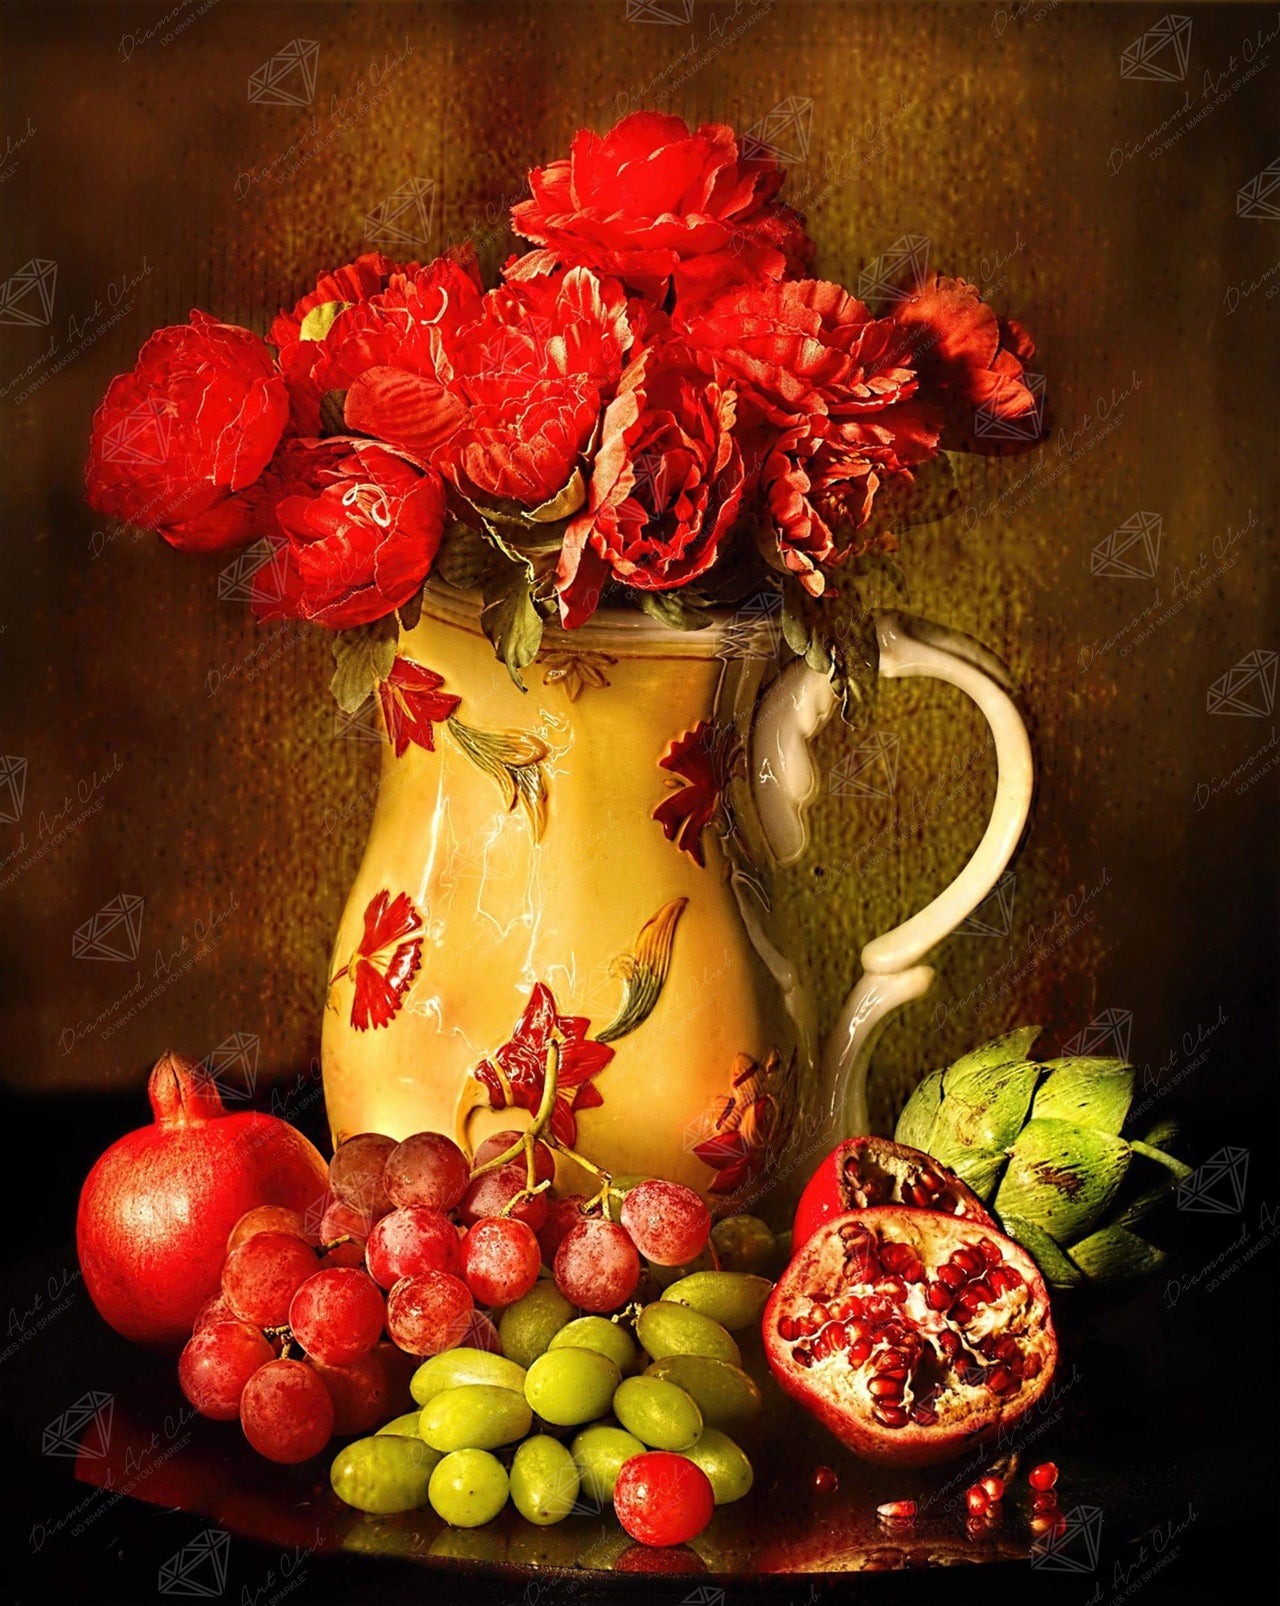 Diamond Painting Flower and Fruits 21.6" x 27.2″ (55cm x 69cm) / Square With 33 Colors Including 3 ABs / 58,536